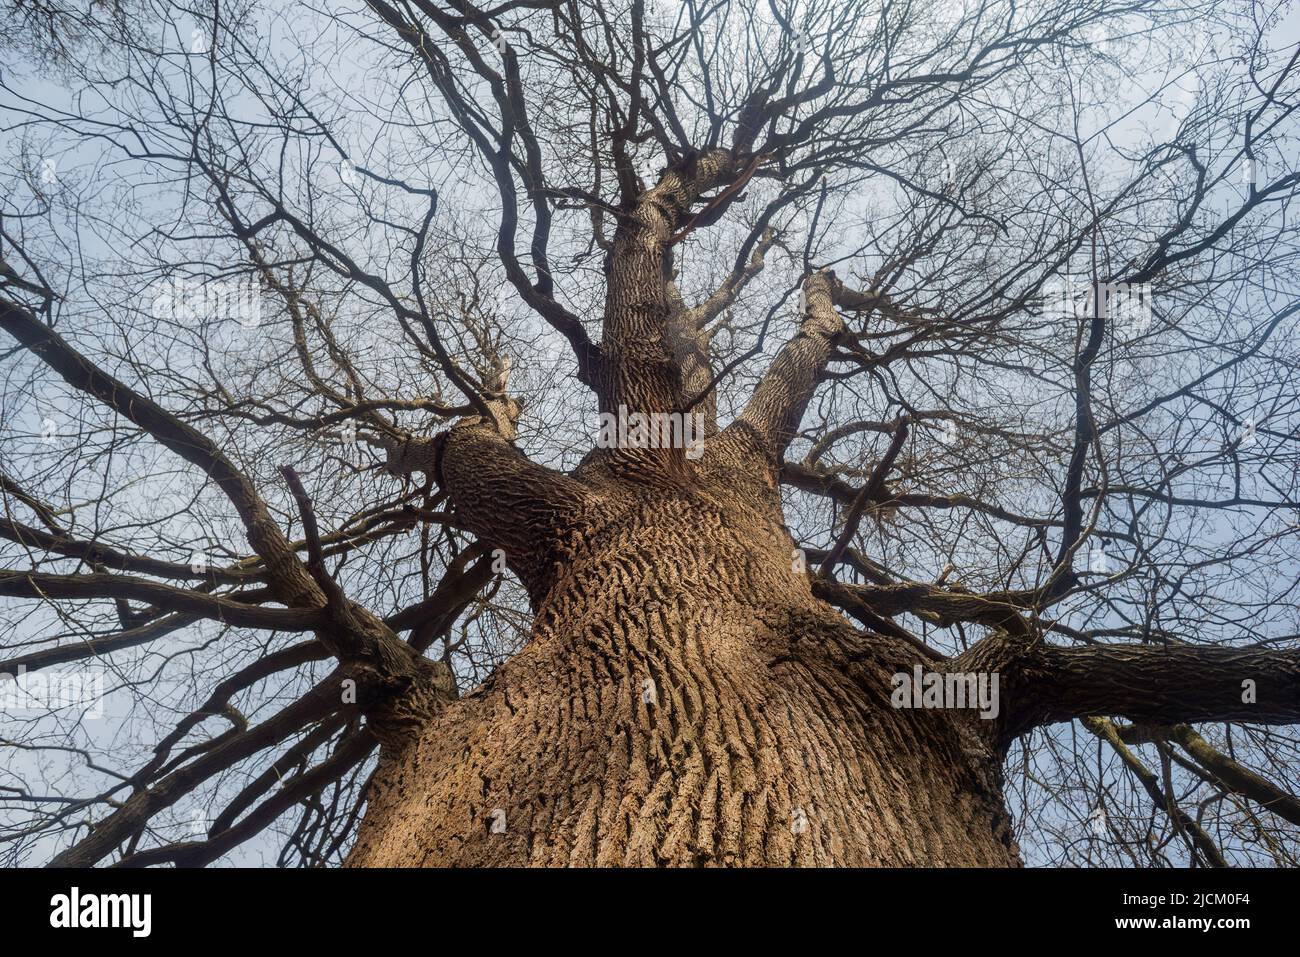 Sweet chestnut a deciduous tree in early spring with no leaves looking upwards to the sky with outstretched branches Stock Photo